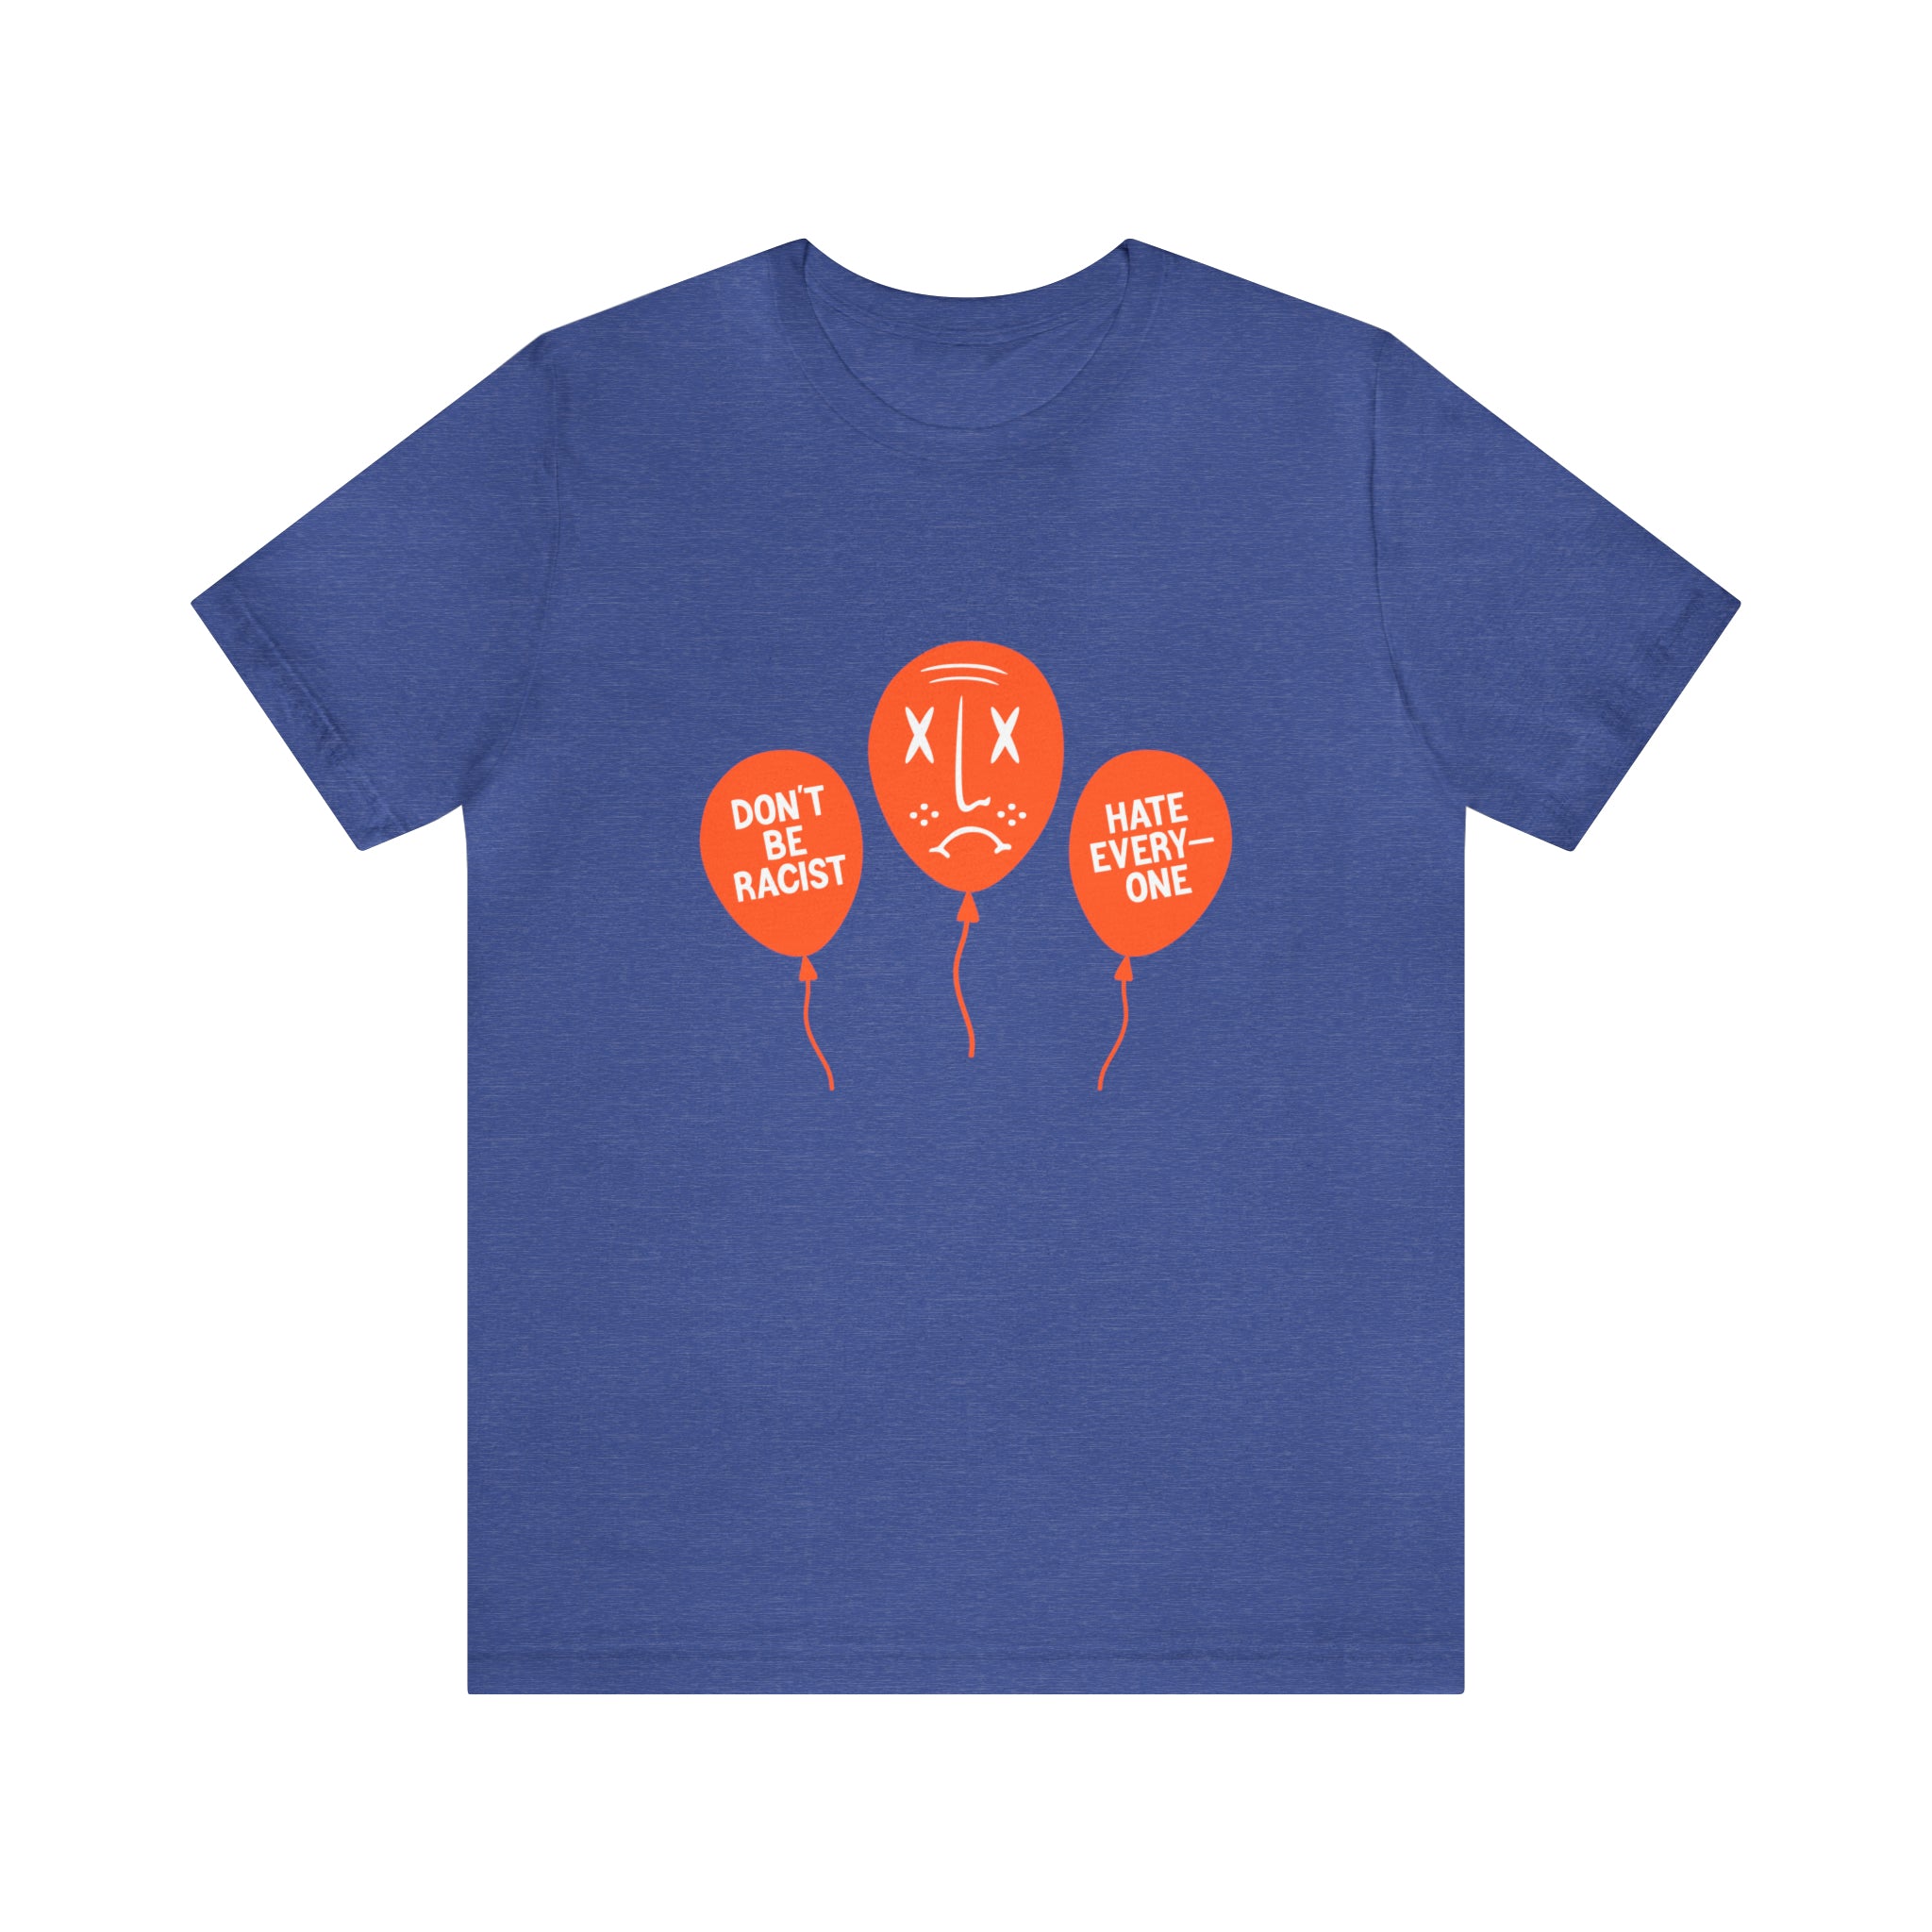 A bold Don't Be T-shirt with three orange balloons.